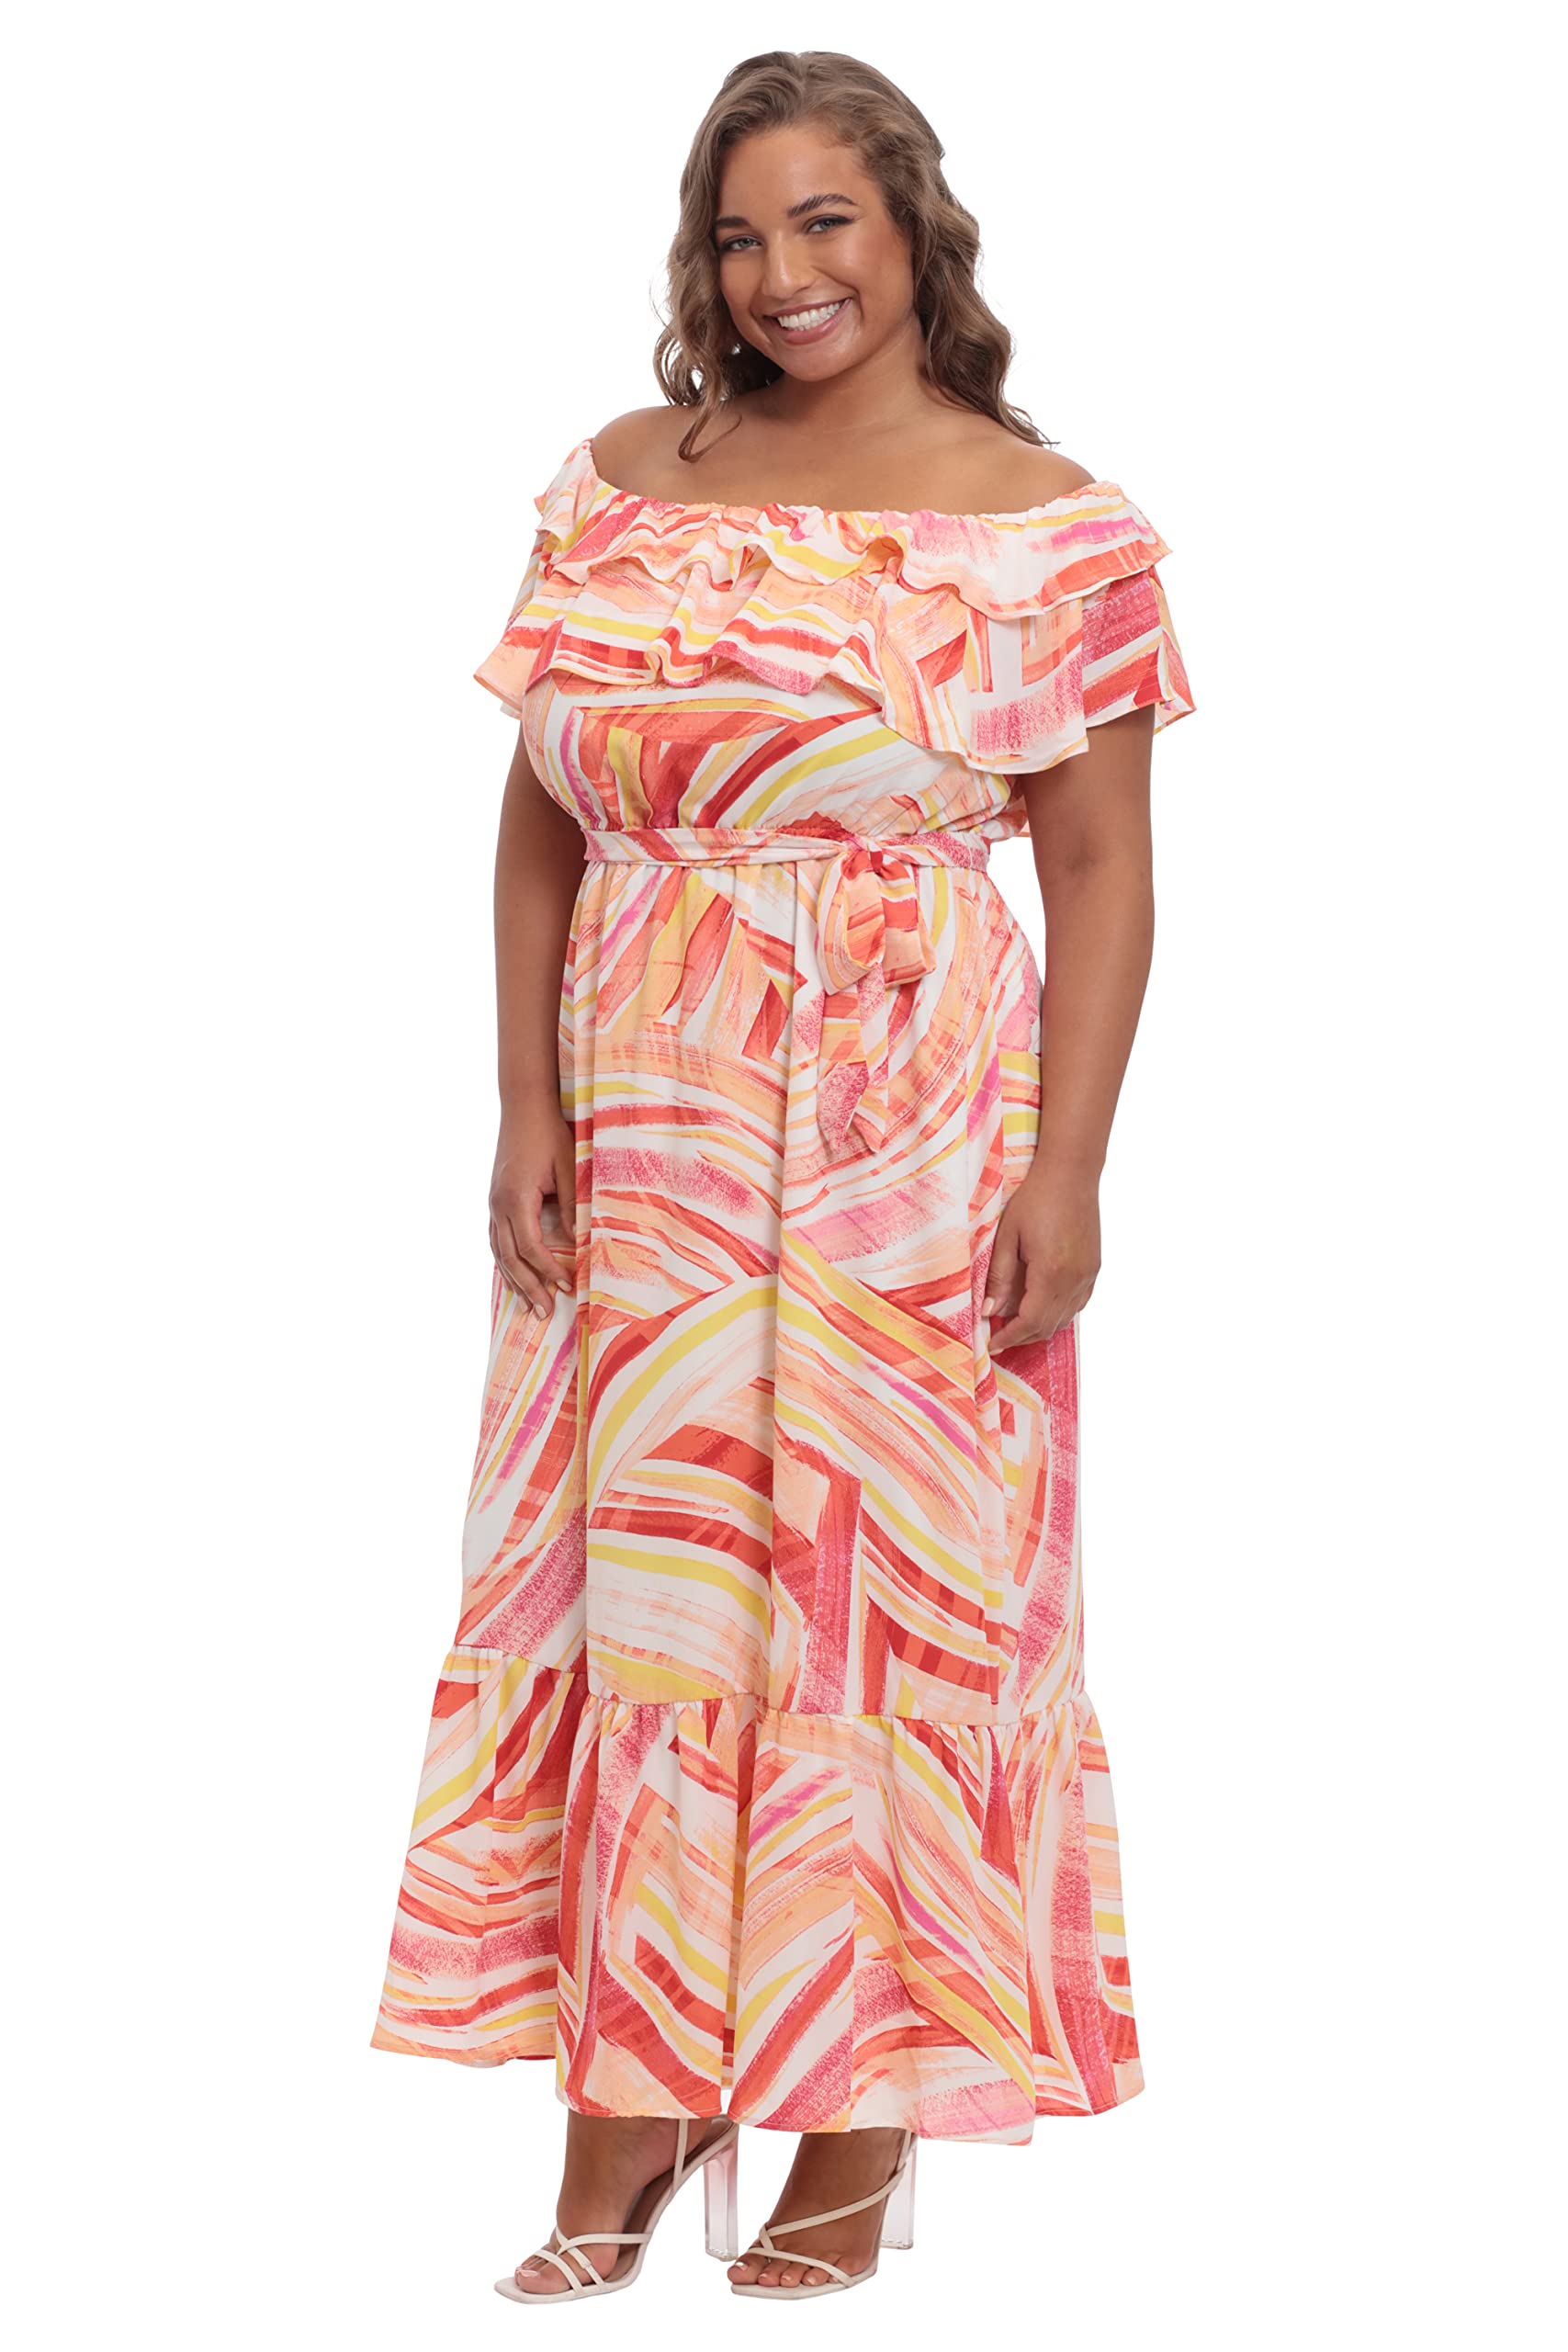 Donna Morgan Women's Maxi Dress with Off The Shoulder Ruffle and Bottom Skirt Tier